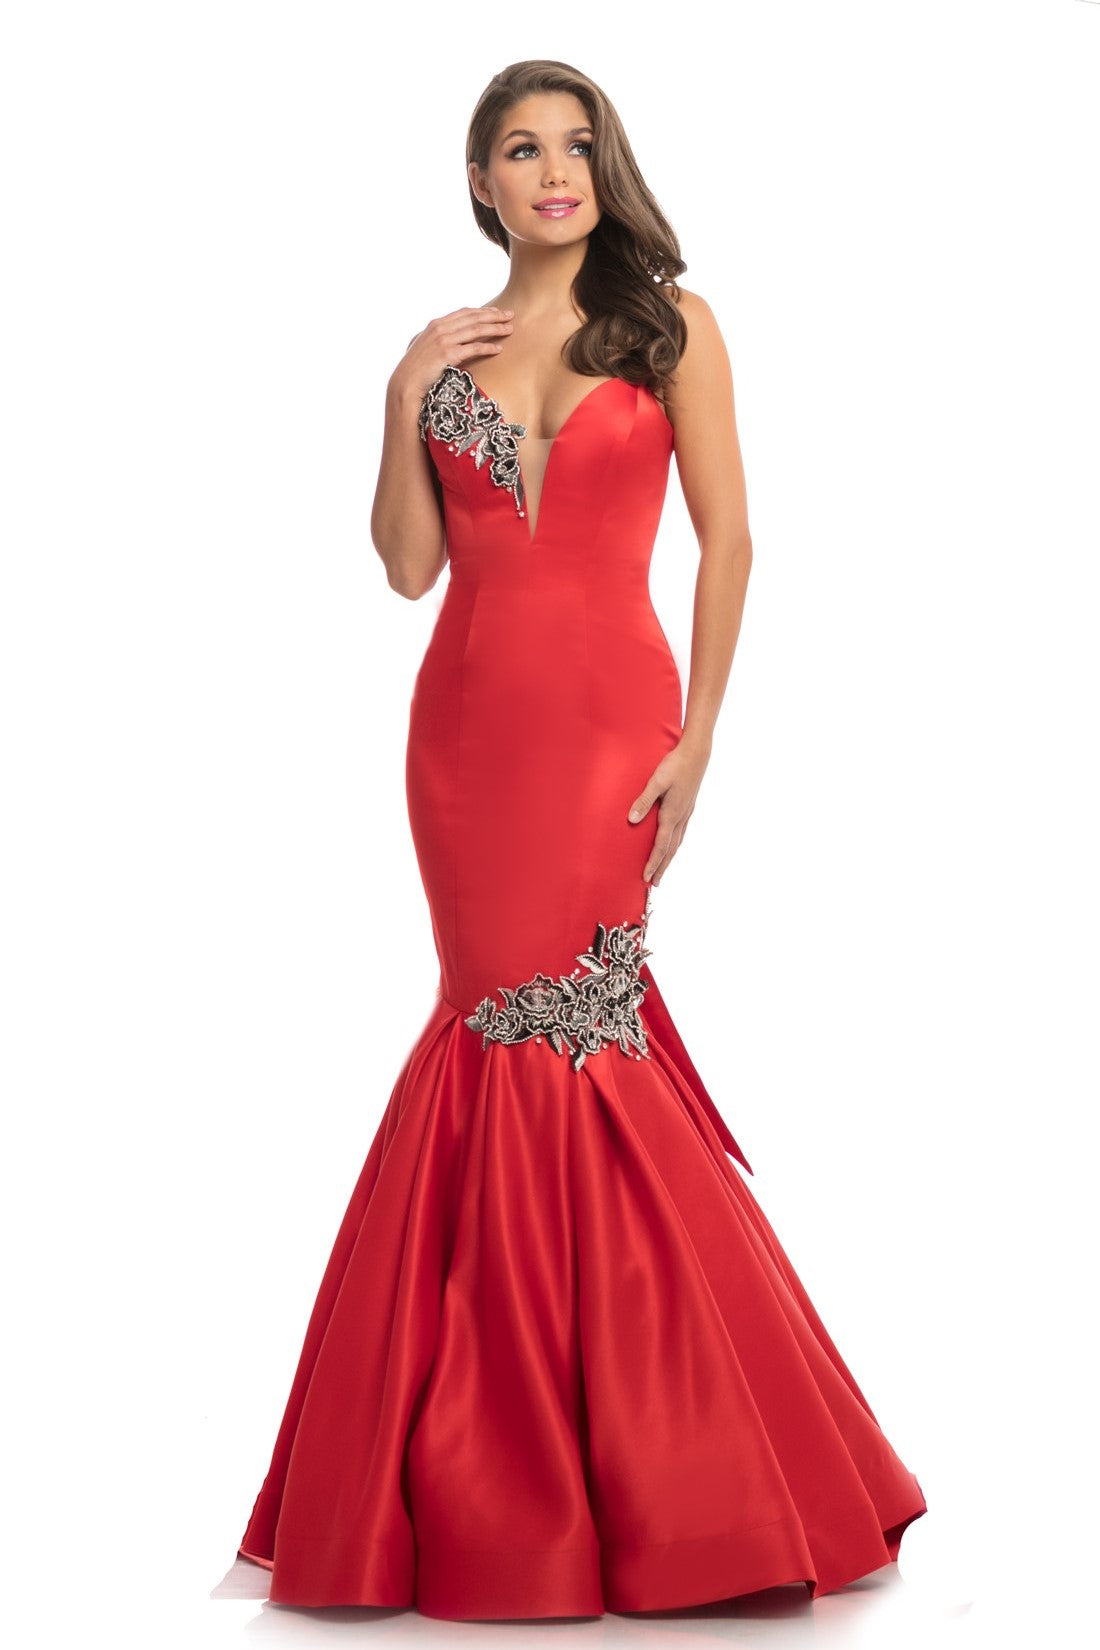 Johnathan Kayne 9030 Sating Mermaid Formal Prom Dress Pageant Gown Size 6 Red